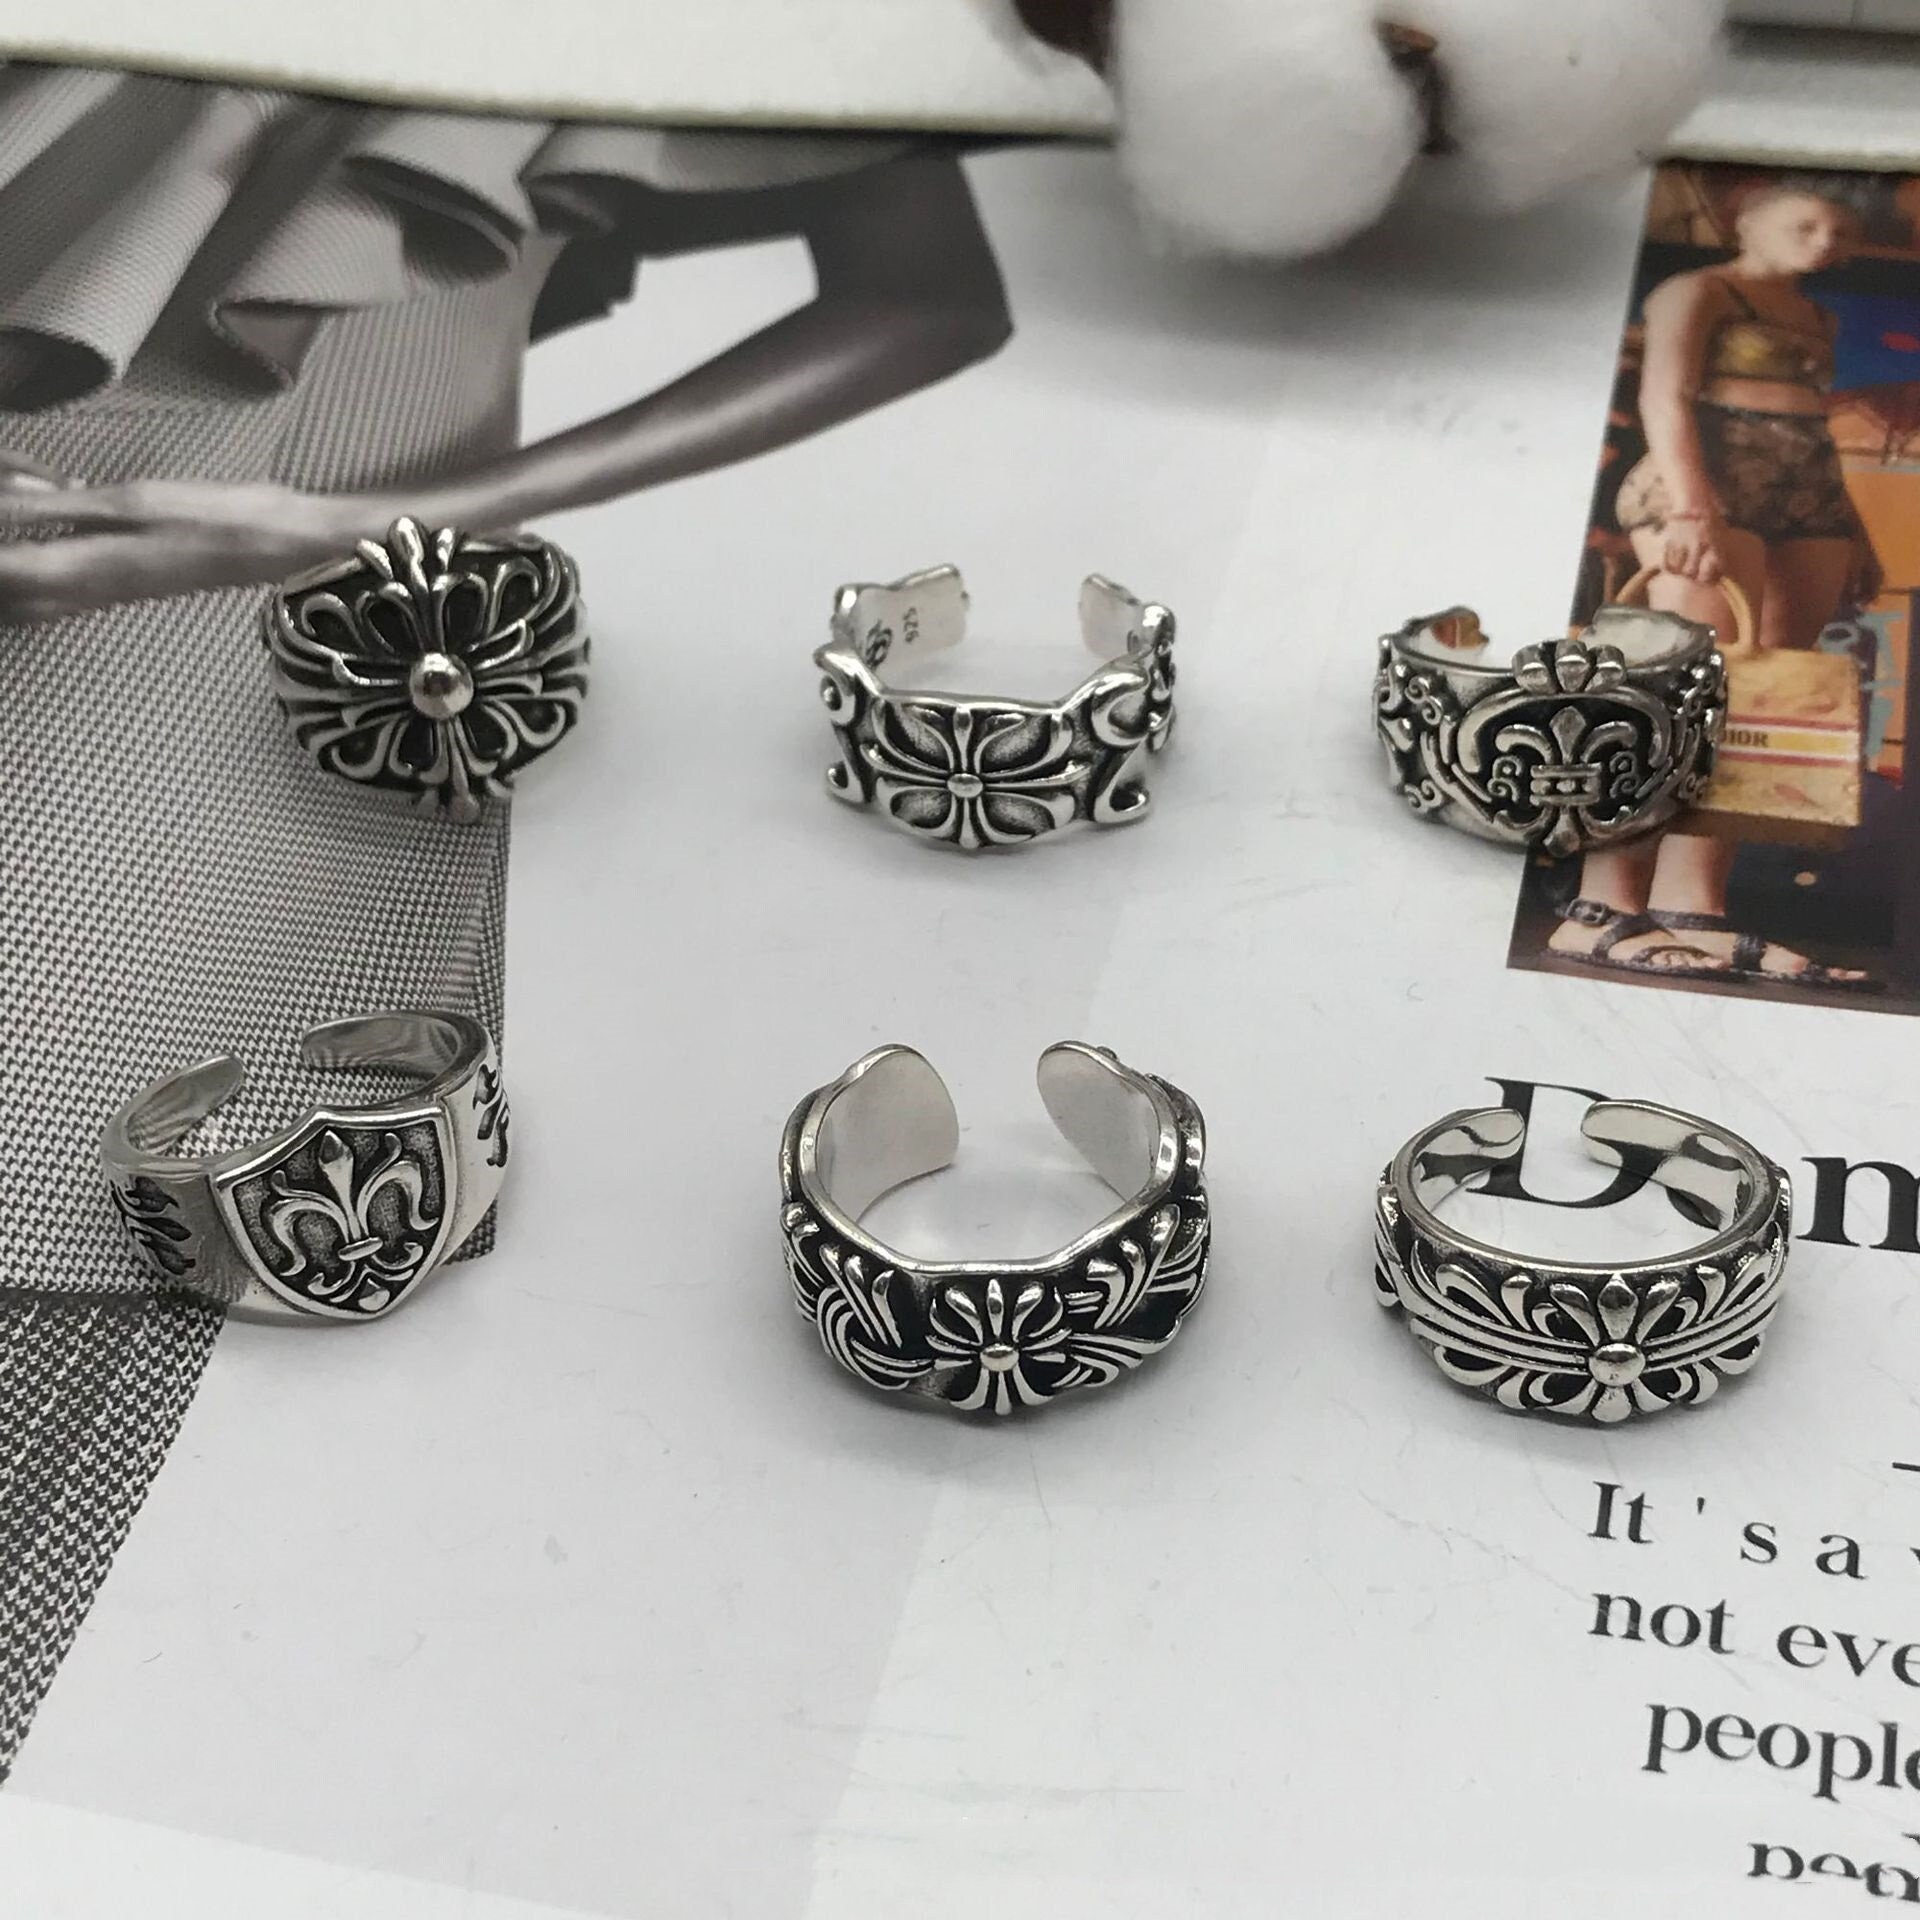 Buy Chrome Hearts rings, jeans, bracelets, belt in Vancouver Canada